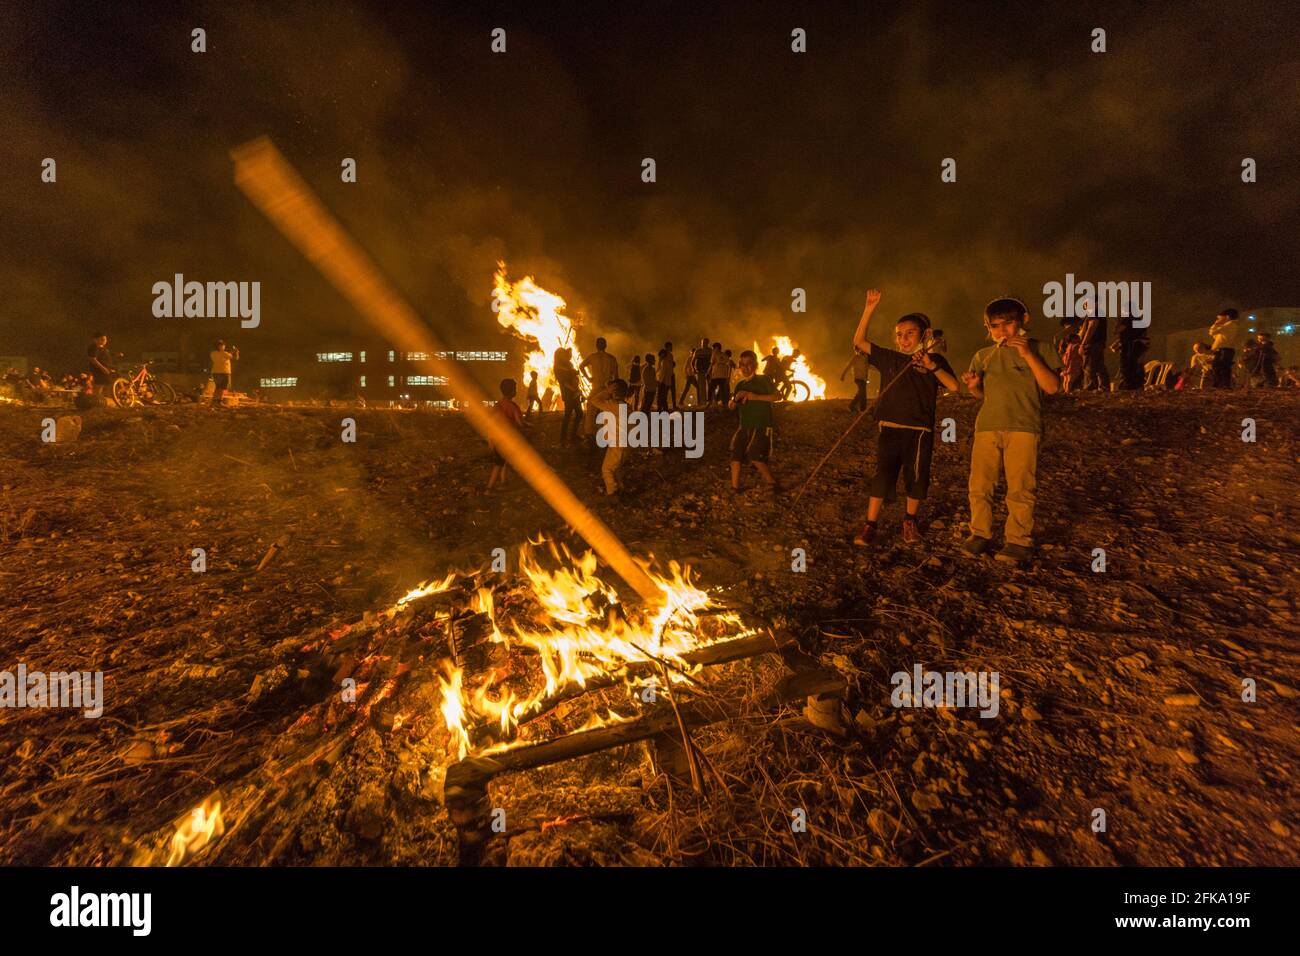 Children throw wood into a fire during the Jewish Holiday of Lag Ba'Omer, which takes place every  18th of Hebrew month Iyar. It is customary during this holiday to make fires. This year, due to fire hazard warning, all fires were concentrated to few sites, hence the large number of pyres. Stock Photo